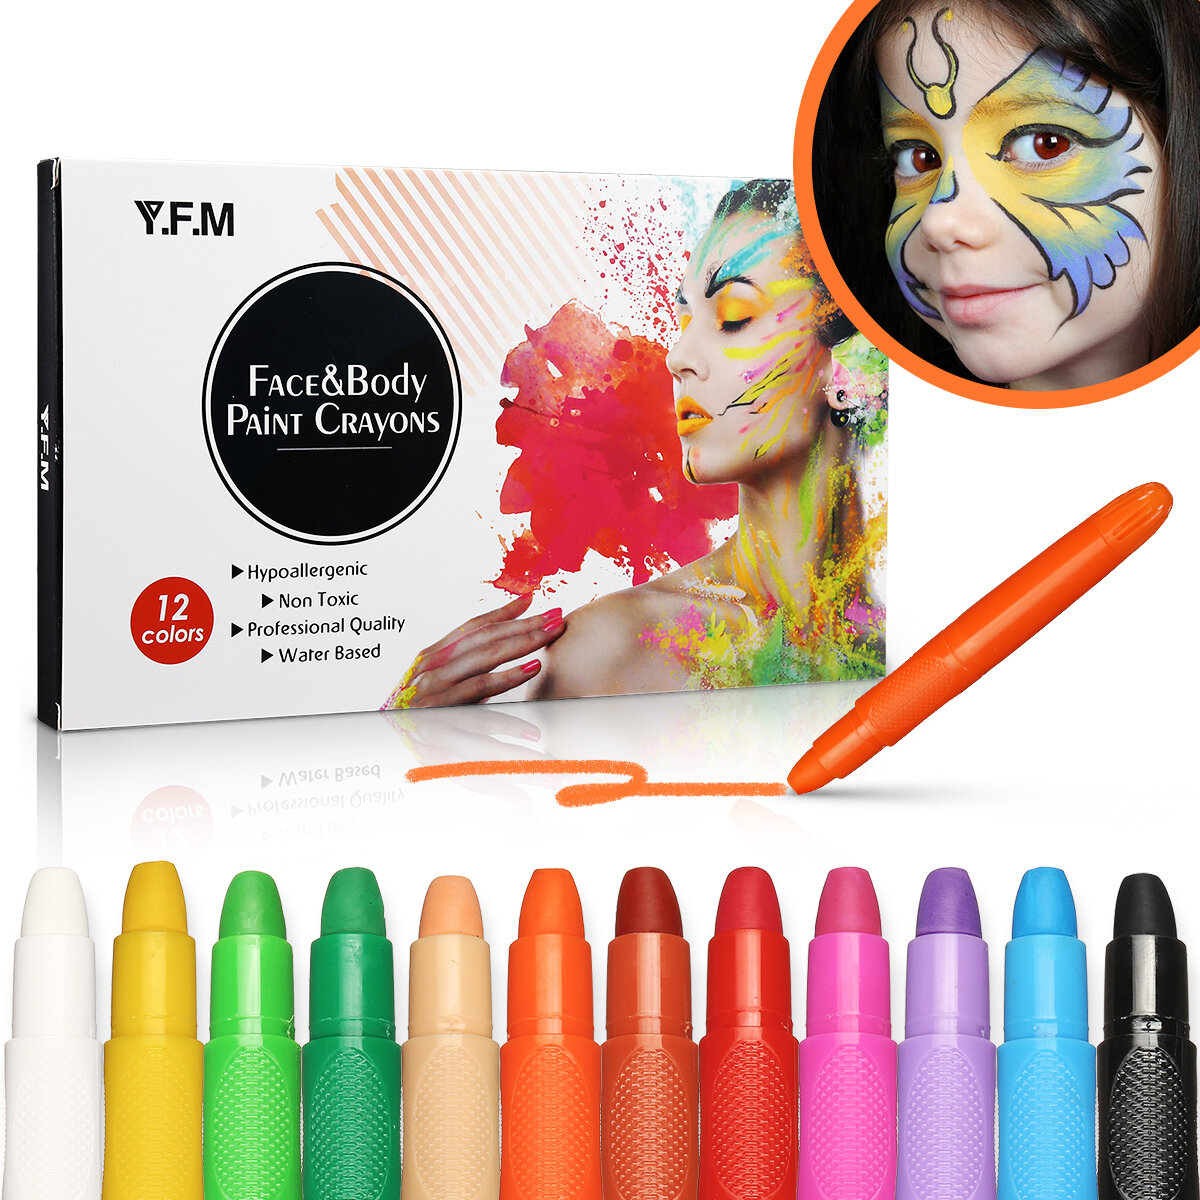 12 Color Makeup Painting Set Splash-proof Non-toxic Face Body Paint Crayons for Party Festival Celeb